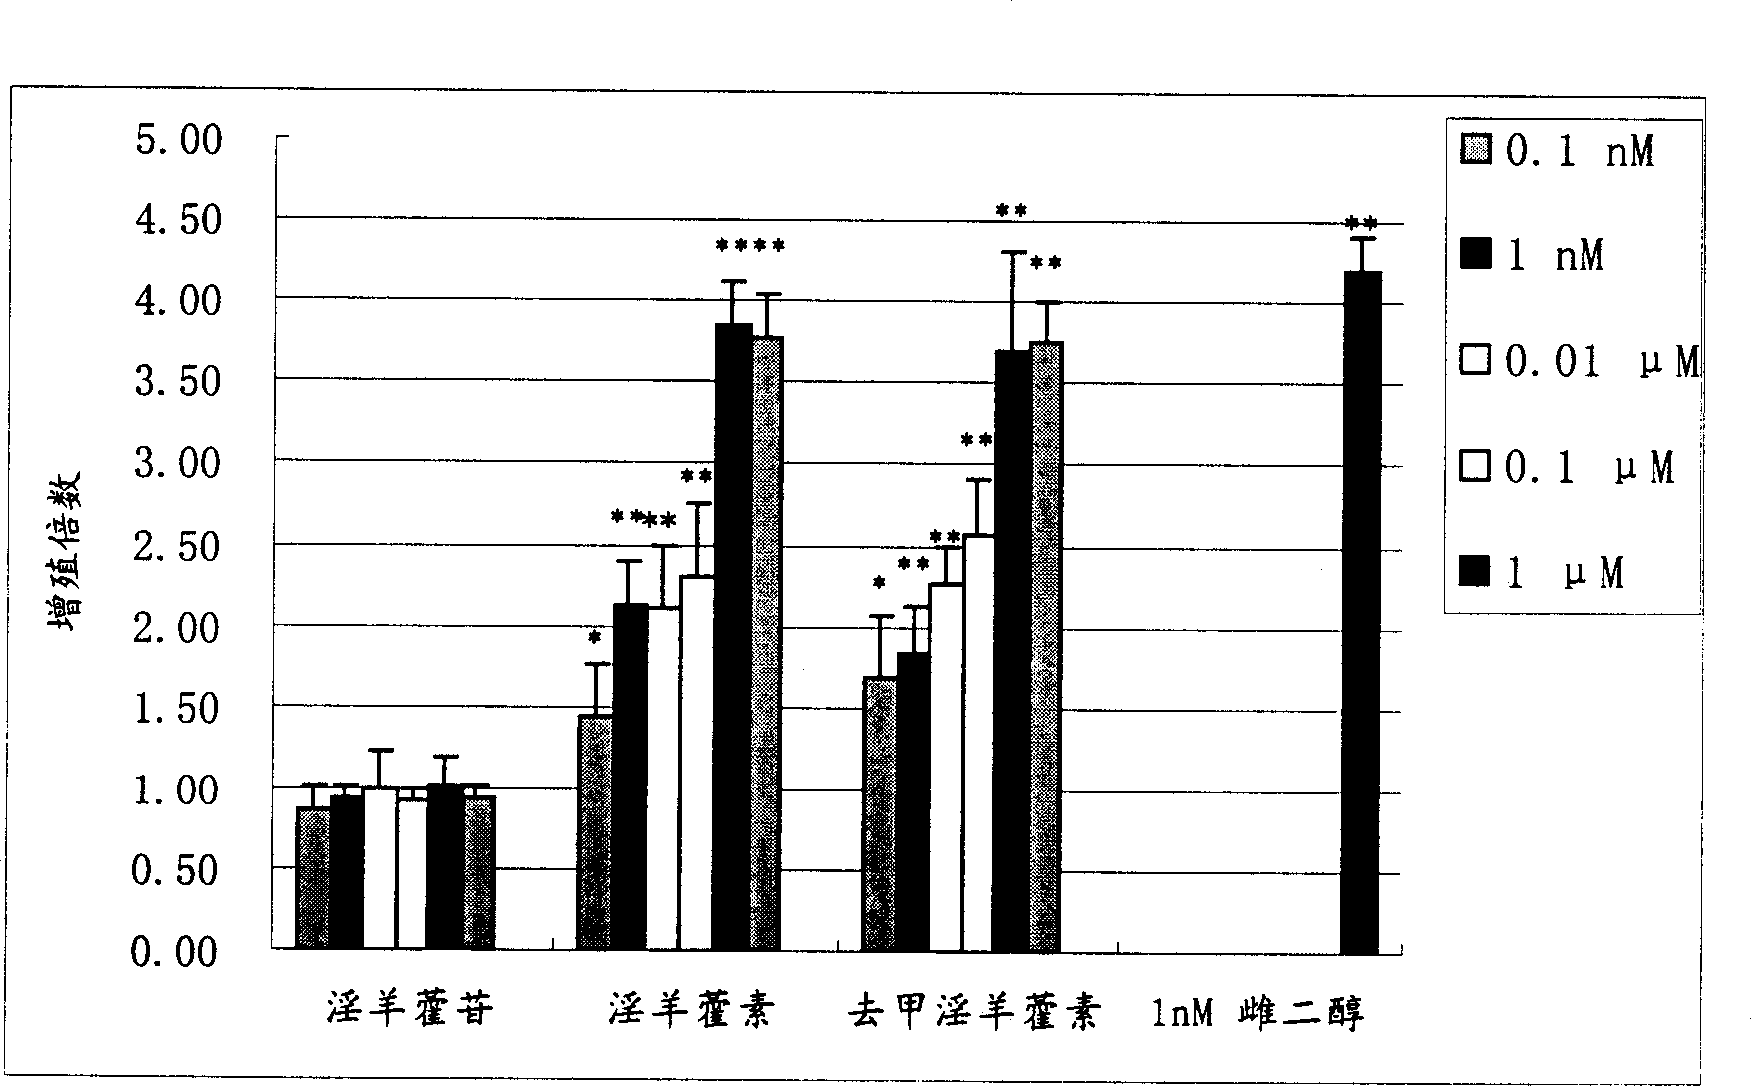 Medicine composite containing icaritin and demethylicaritin and its application